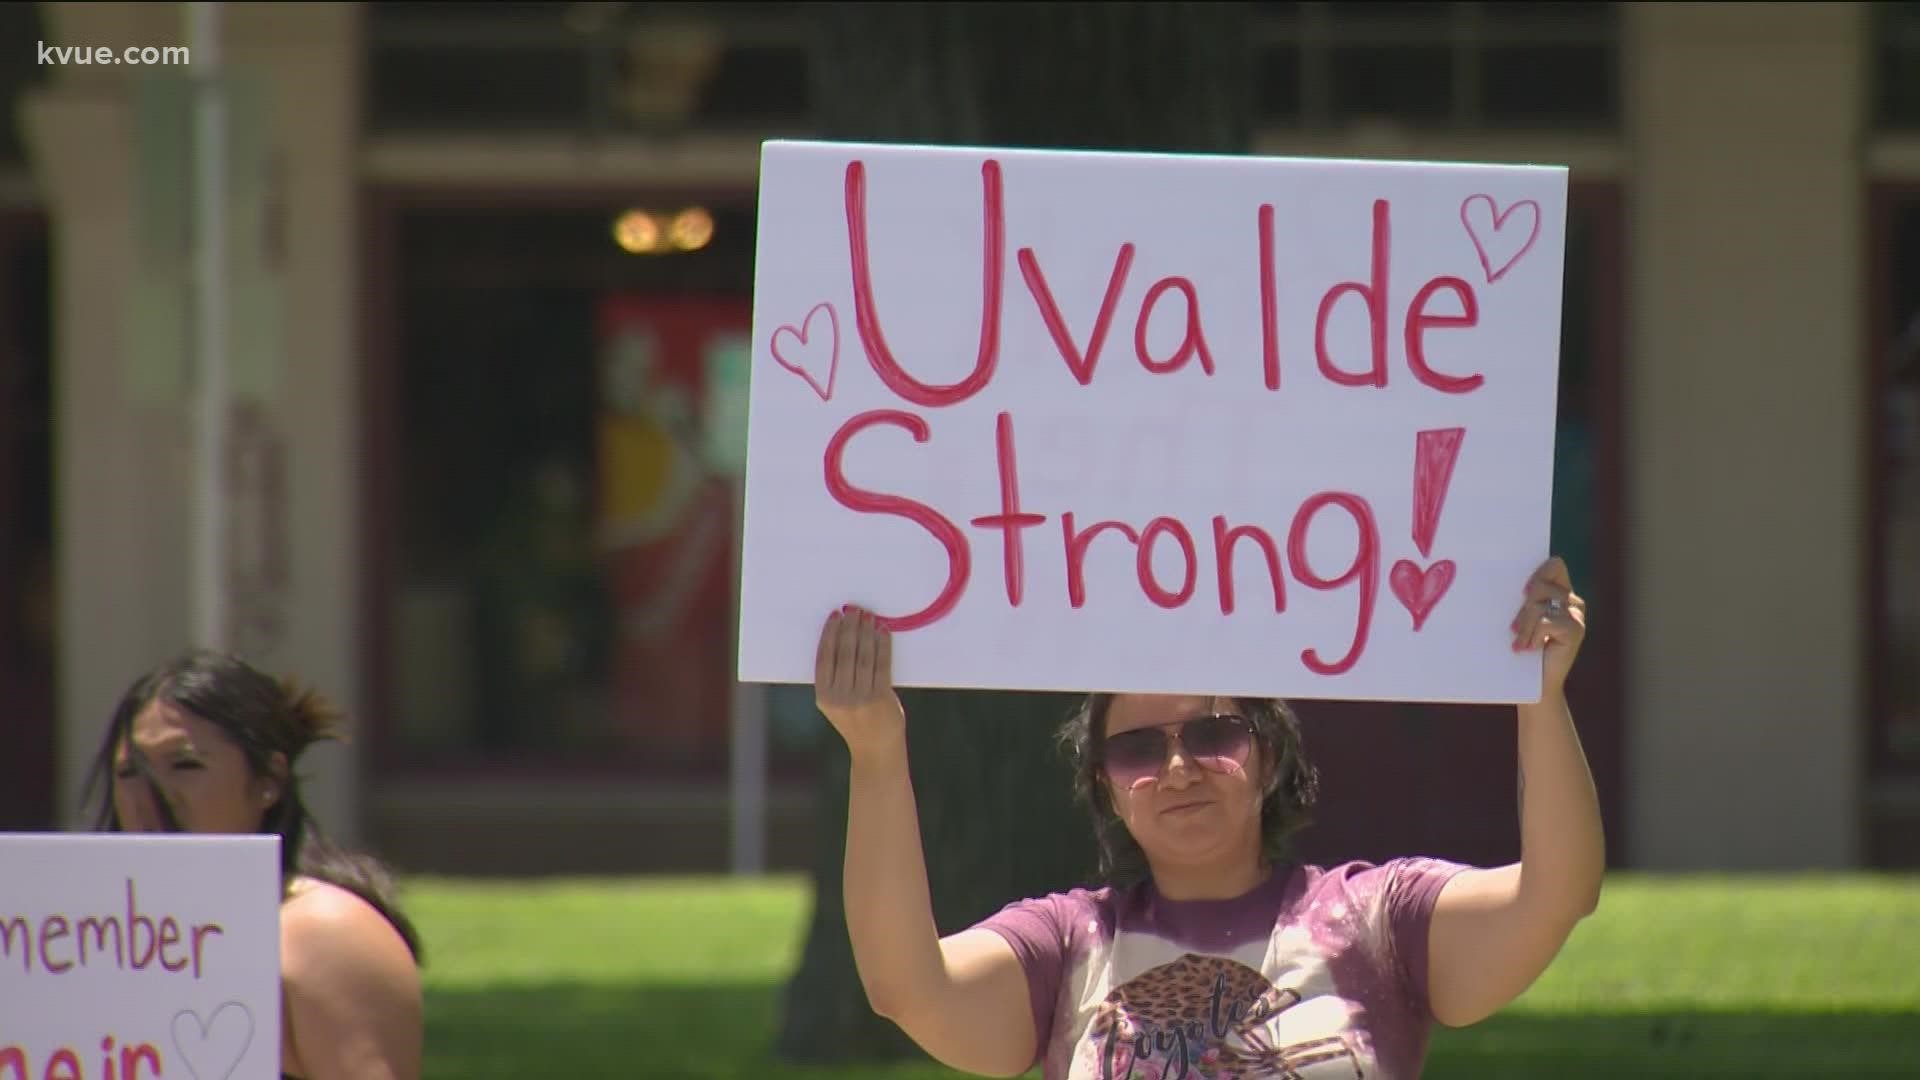 On Wednesday night, Uvalde ISD held another vigil to let the community come together and grieve. Neighbors are supporting those who have lost loved ones.